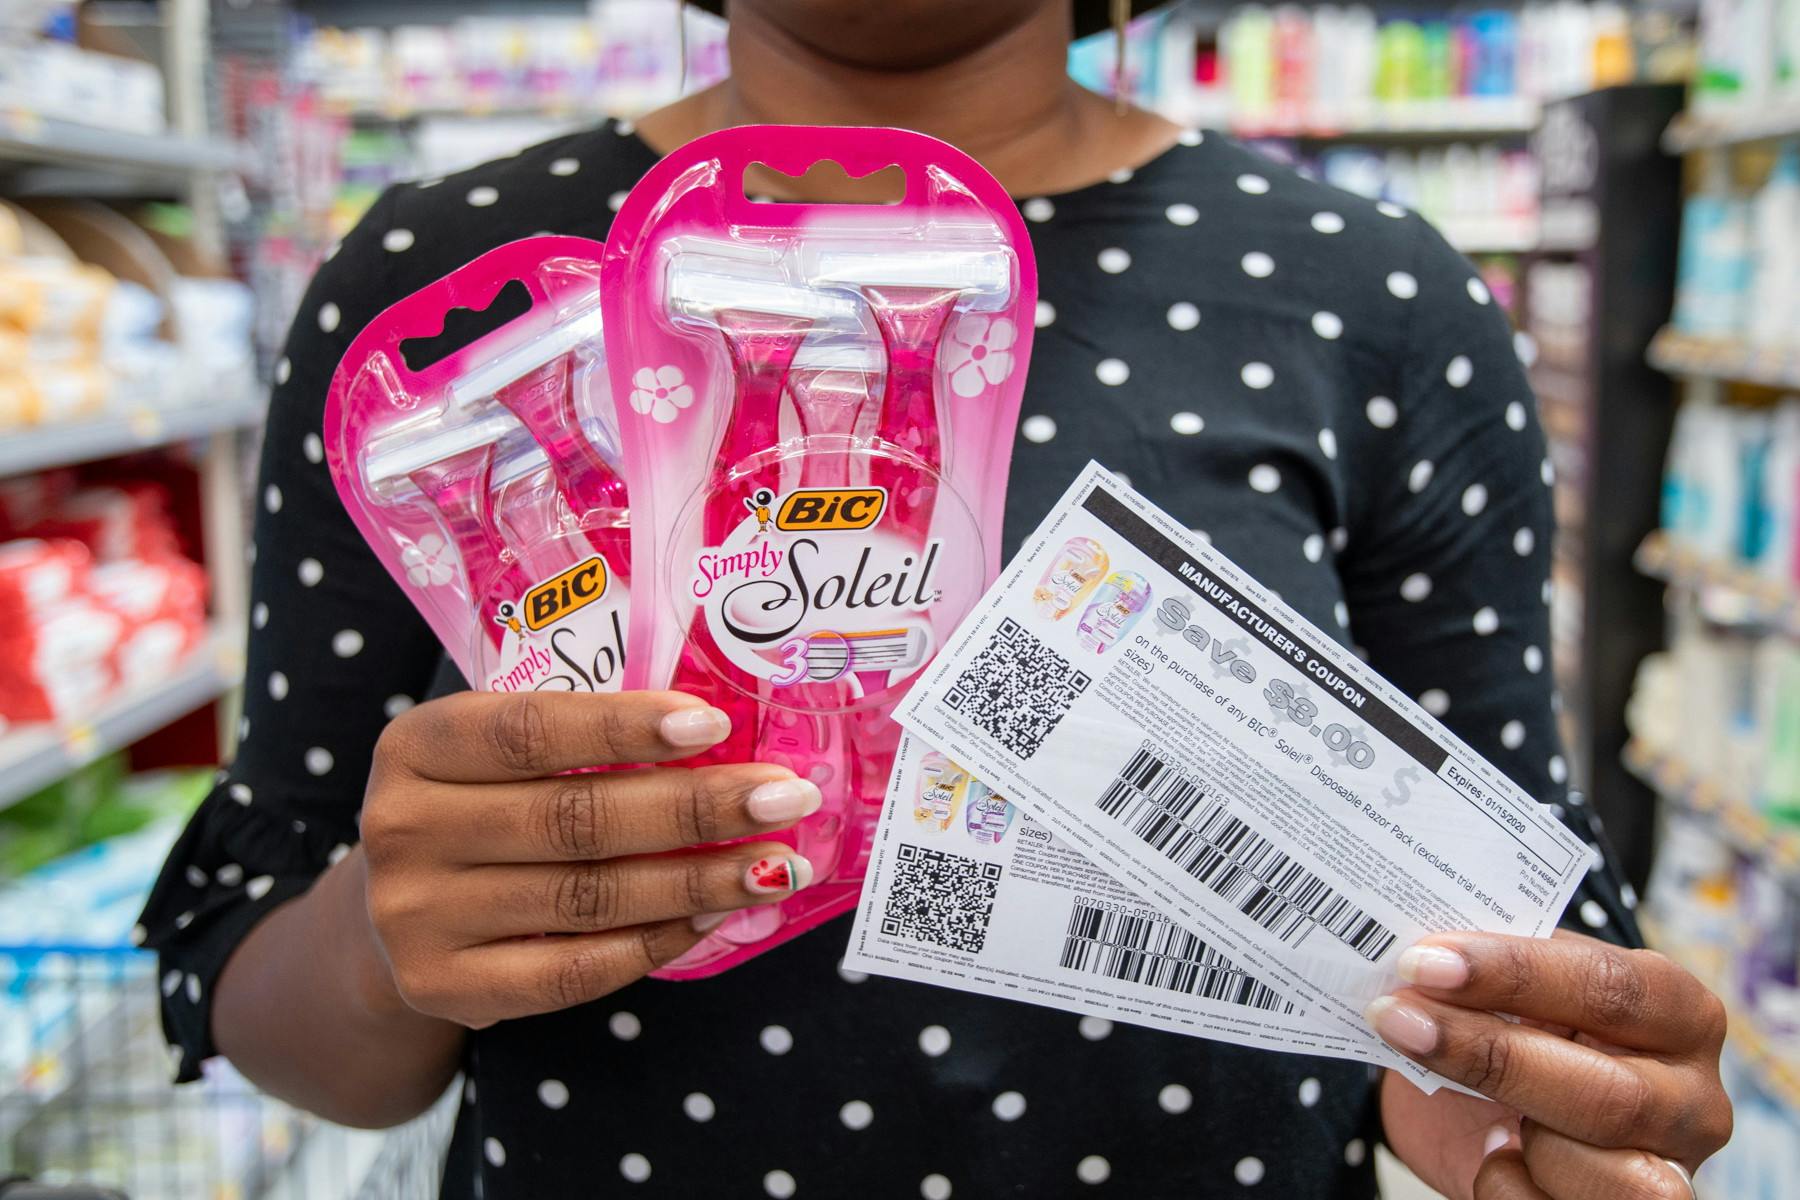 A woman holding two coupons and two bic soleil razor packs.